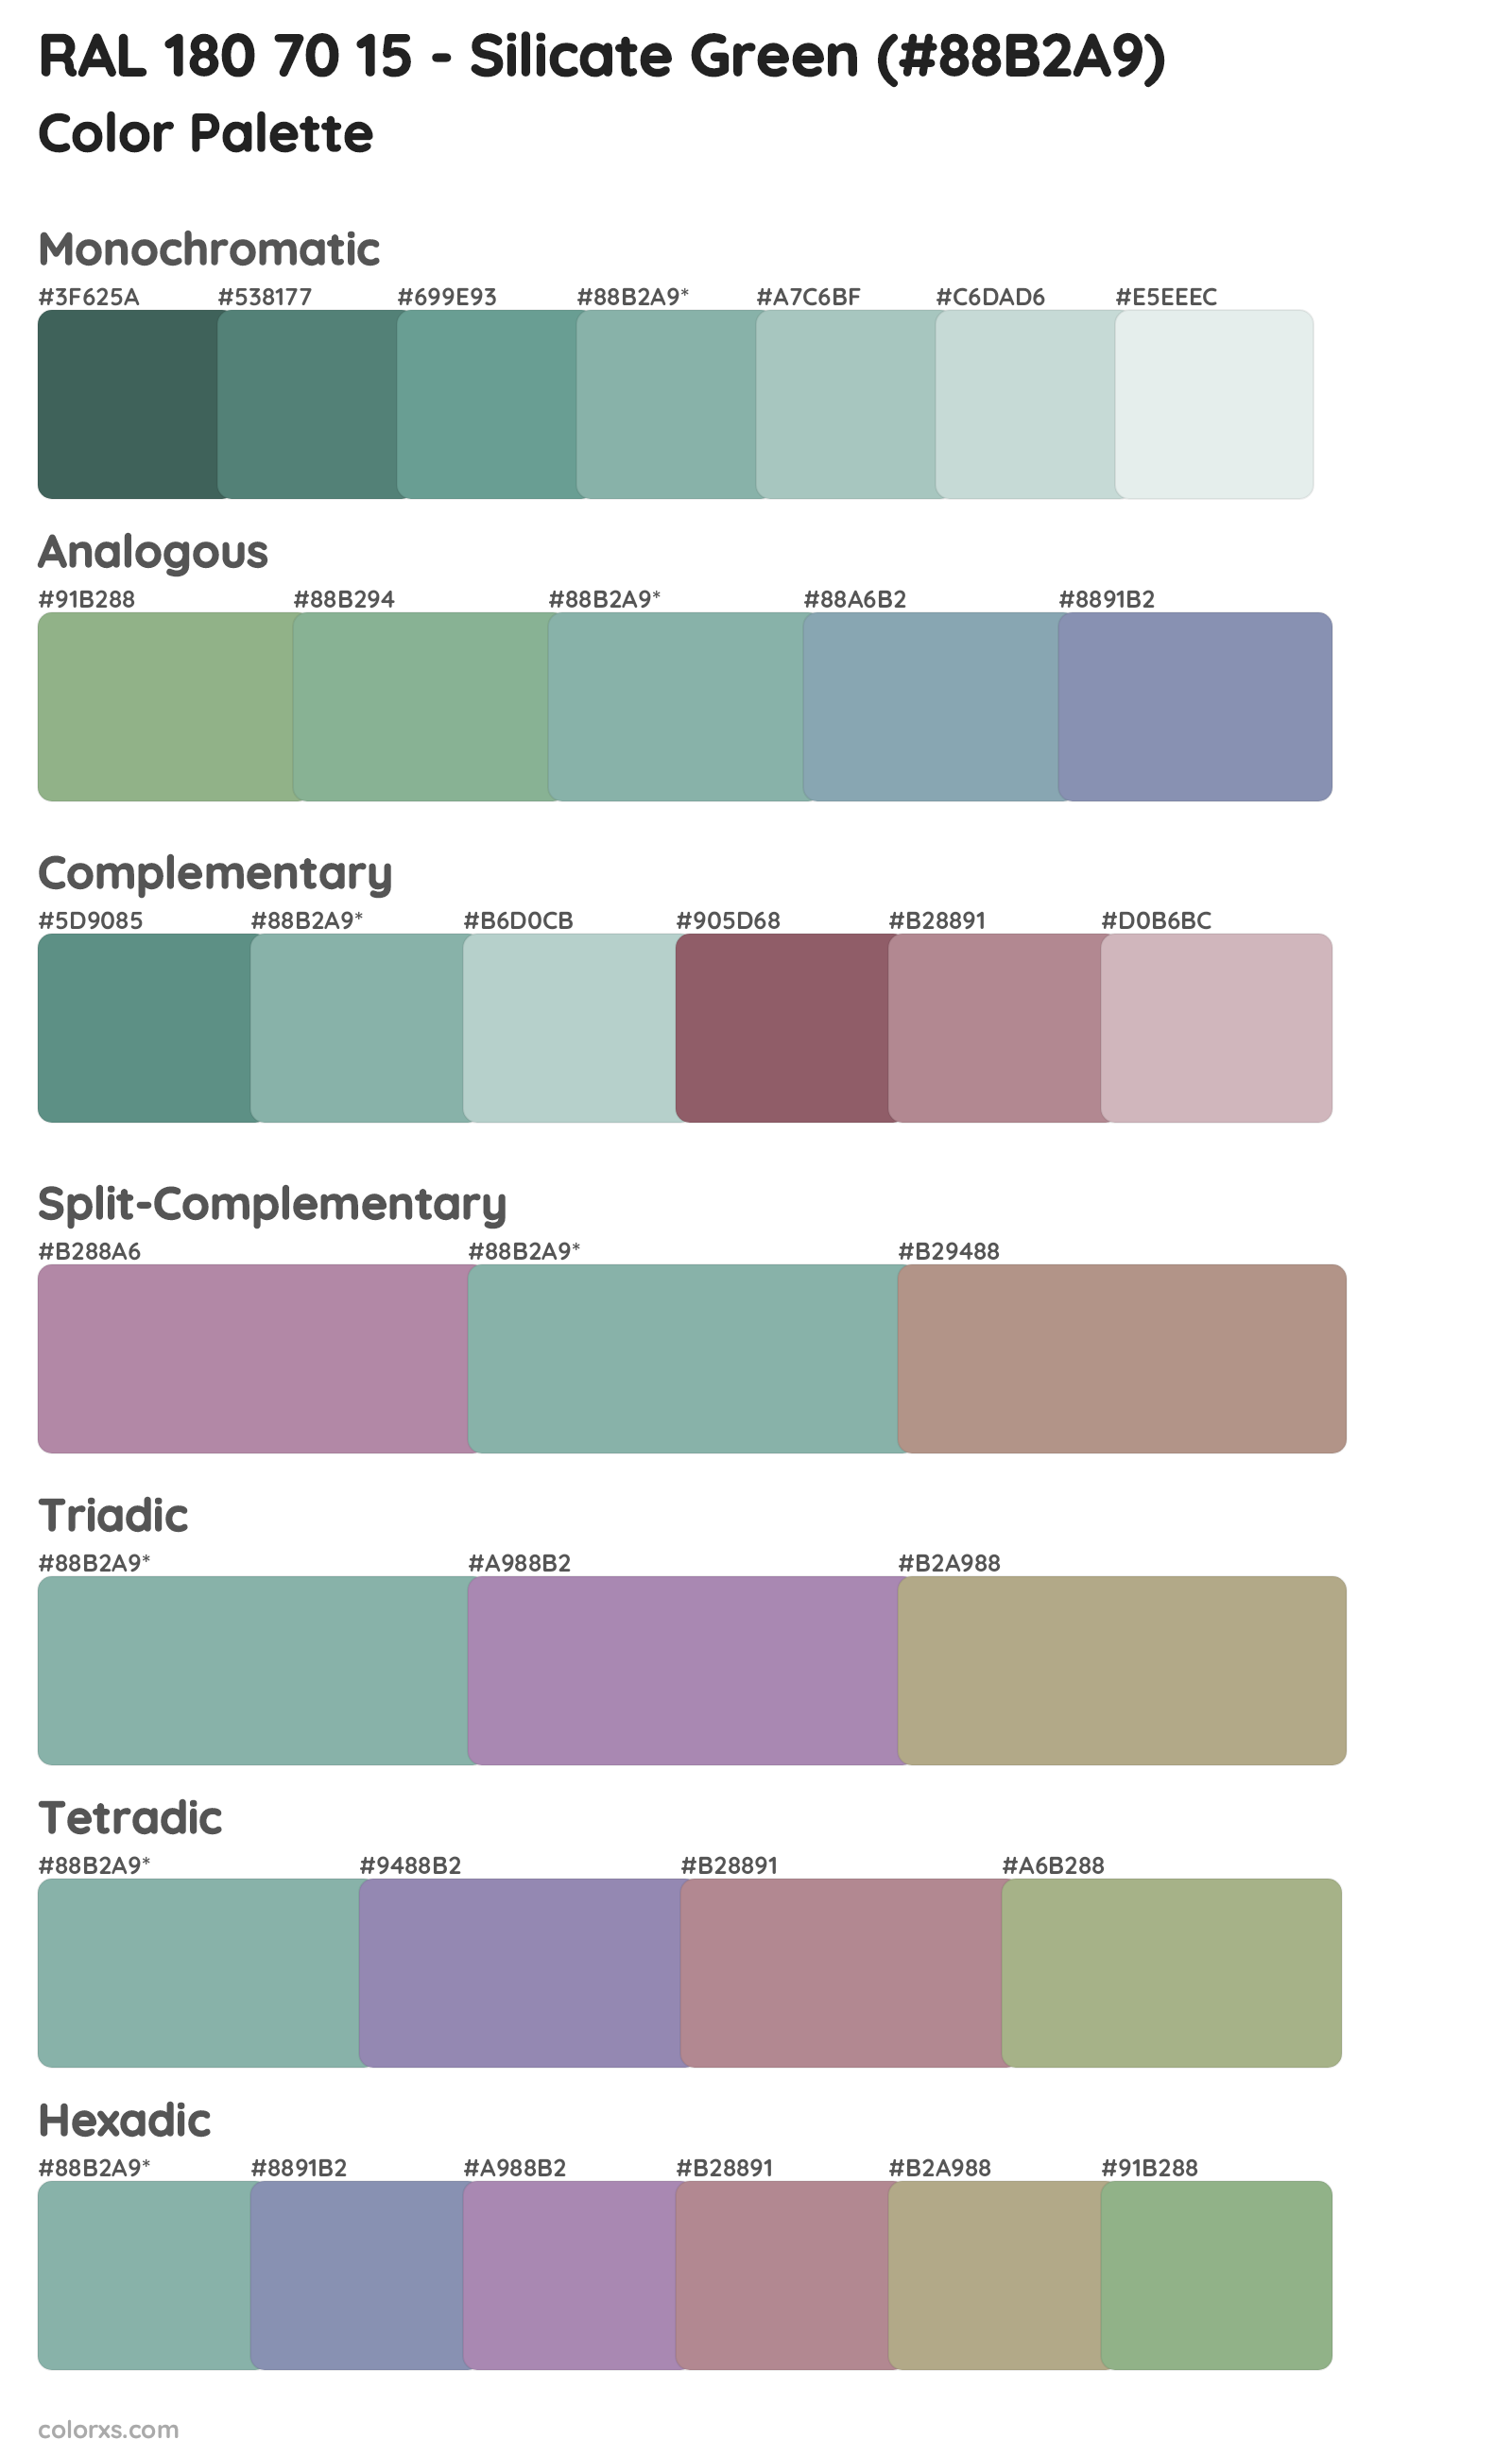 RAL 180 70 15 - Silicate Green Color Scheme Palettes